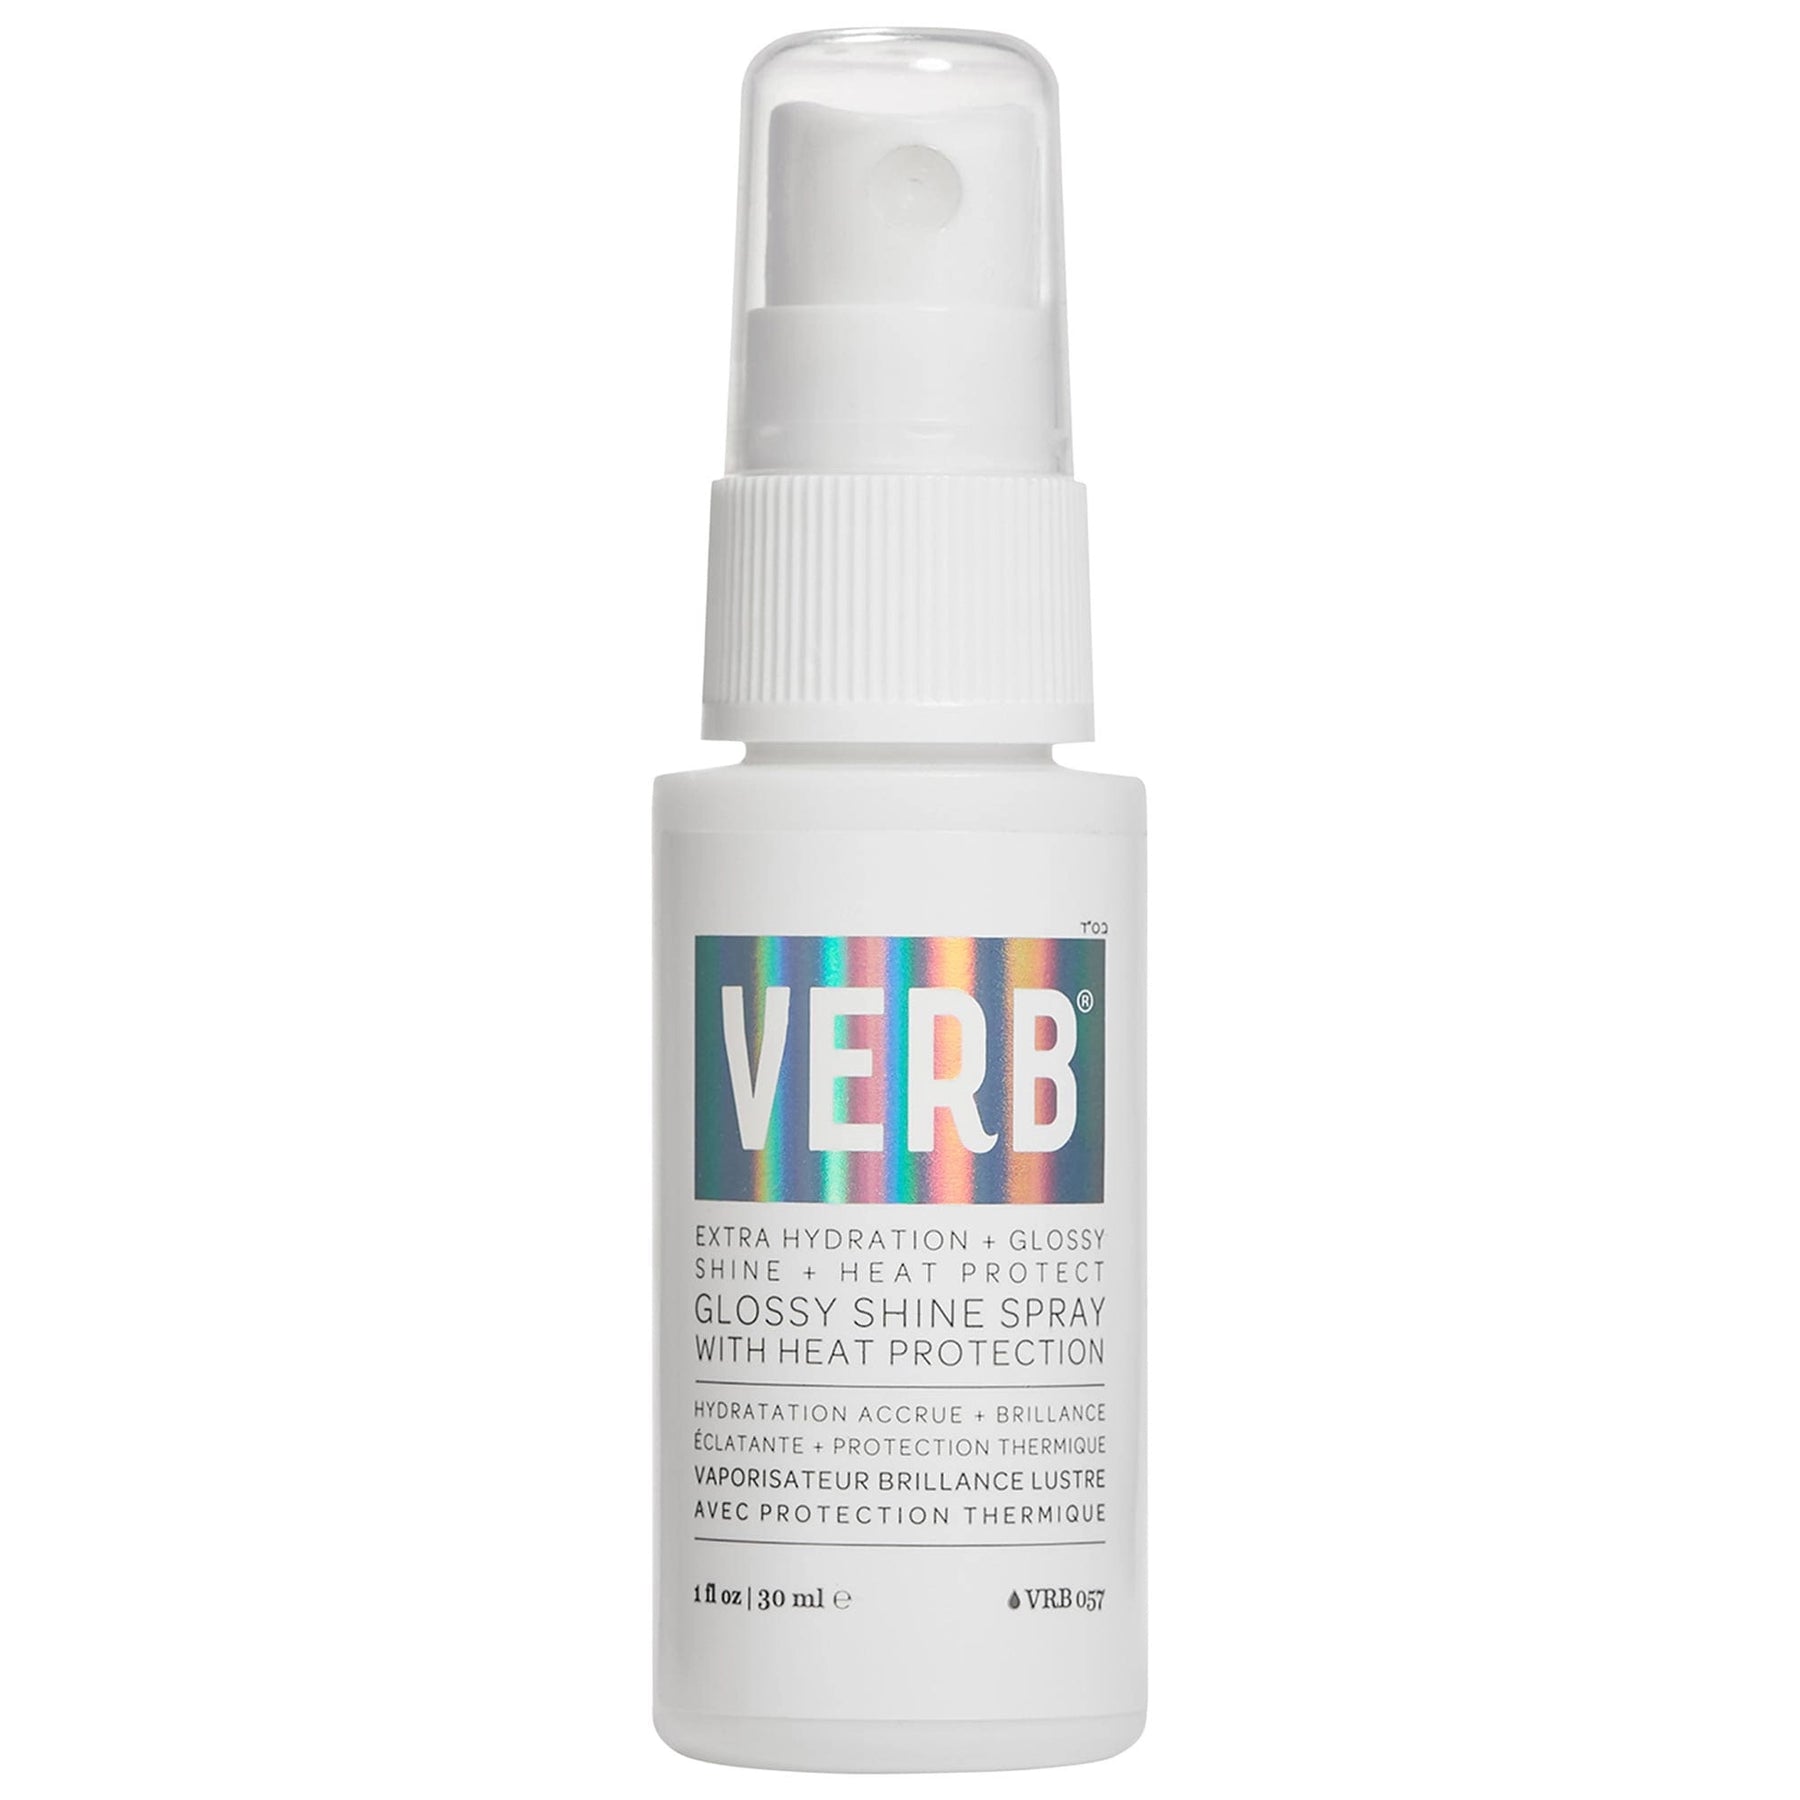 VERB Glossy Shine Spray with Heat Protection